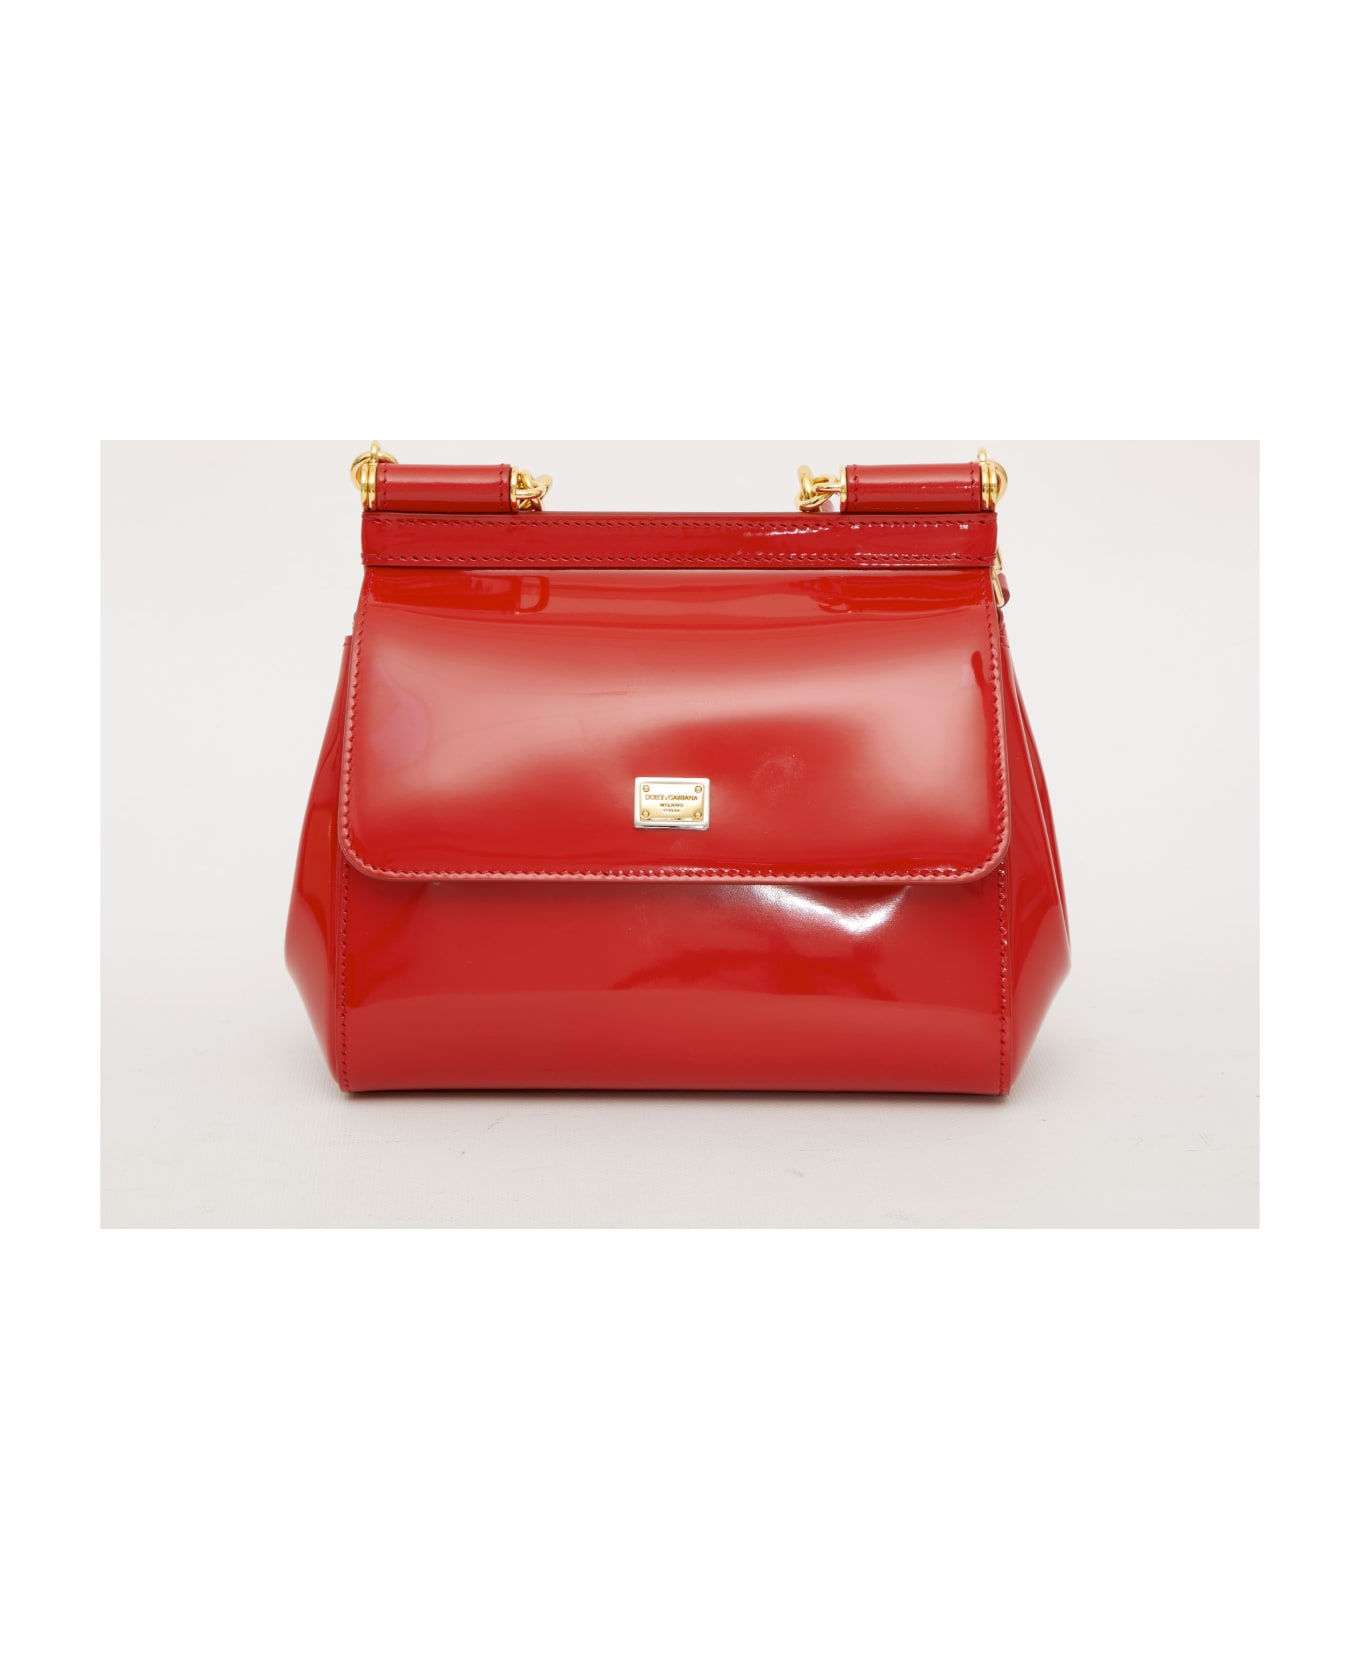 Dolce & Gabbana Small Sicily Red Bag - Rosso